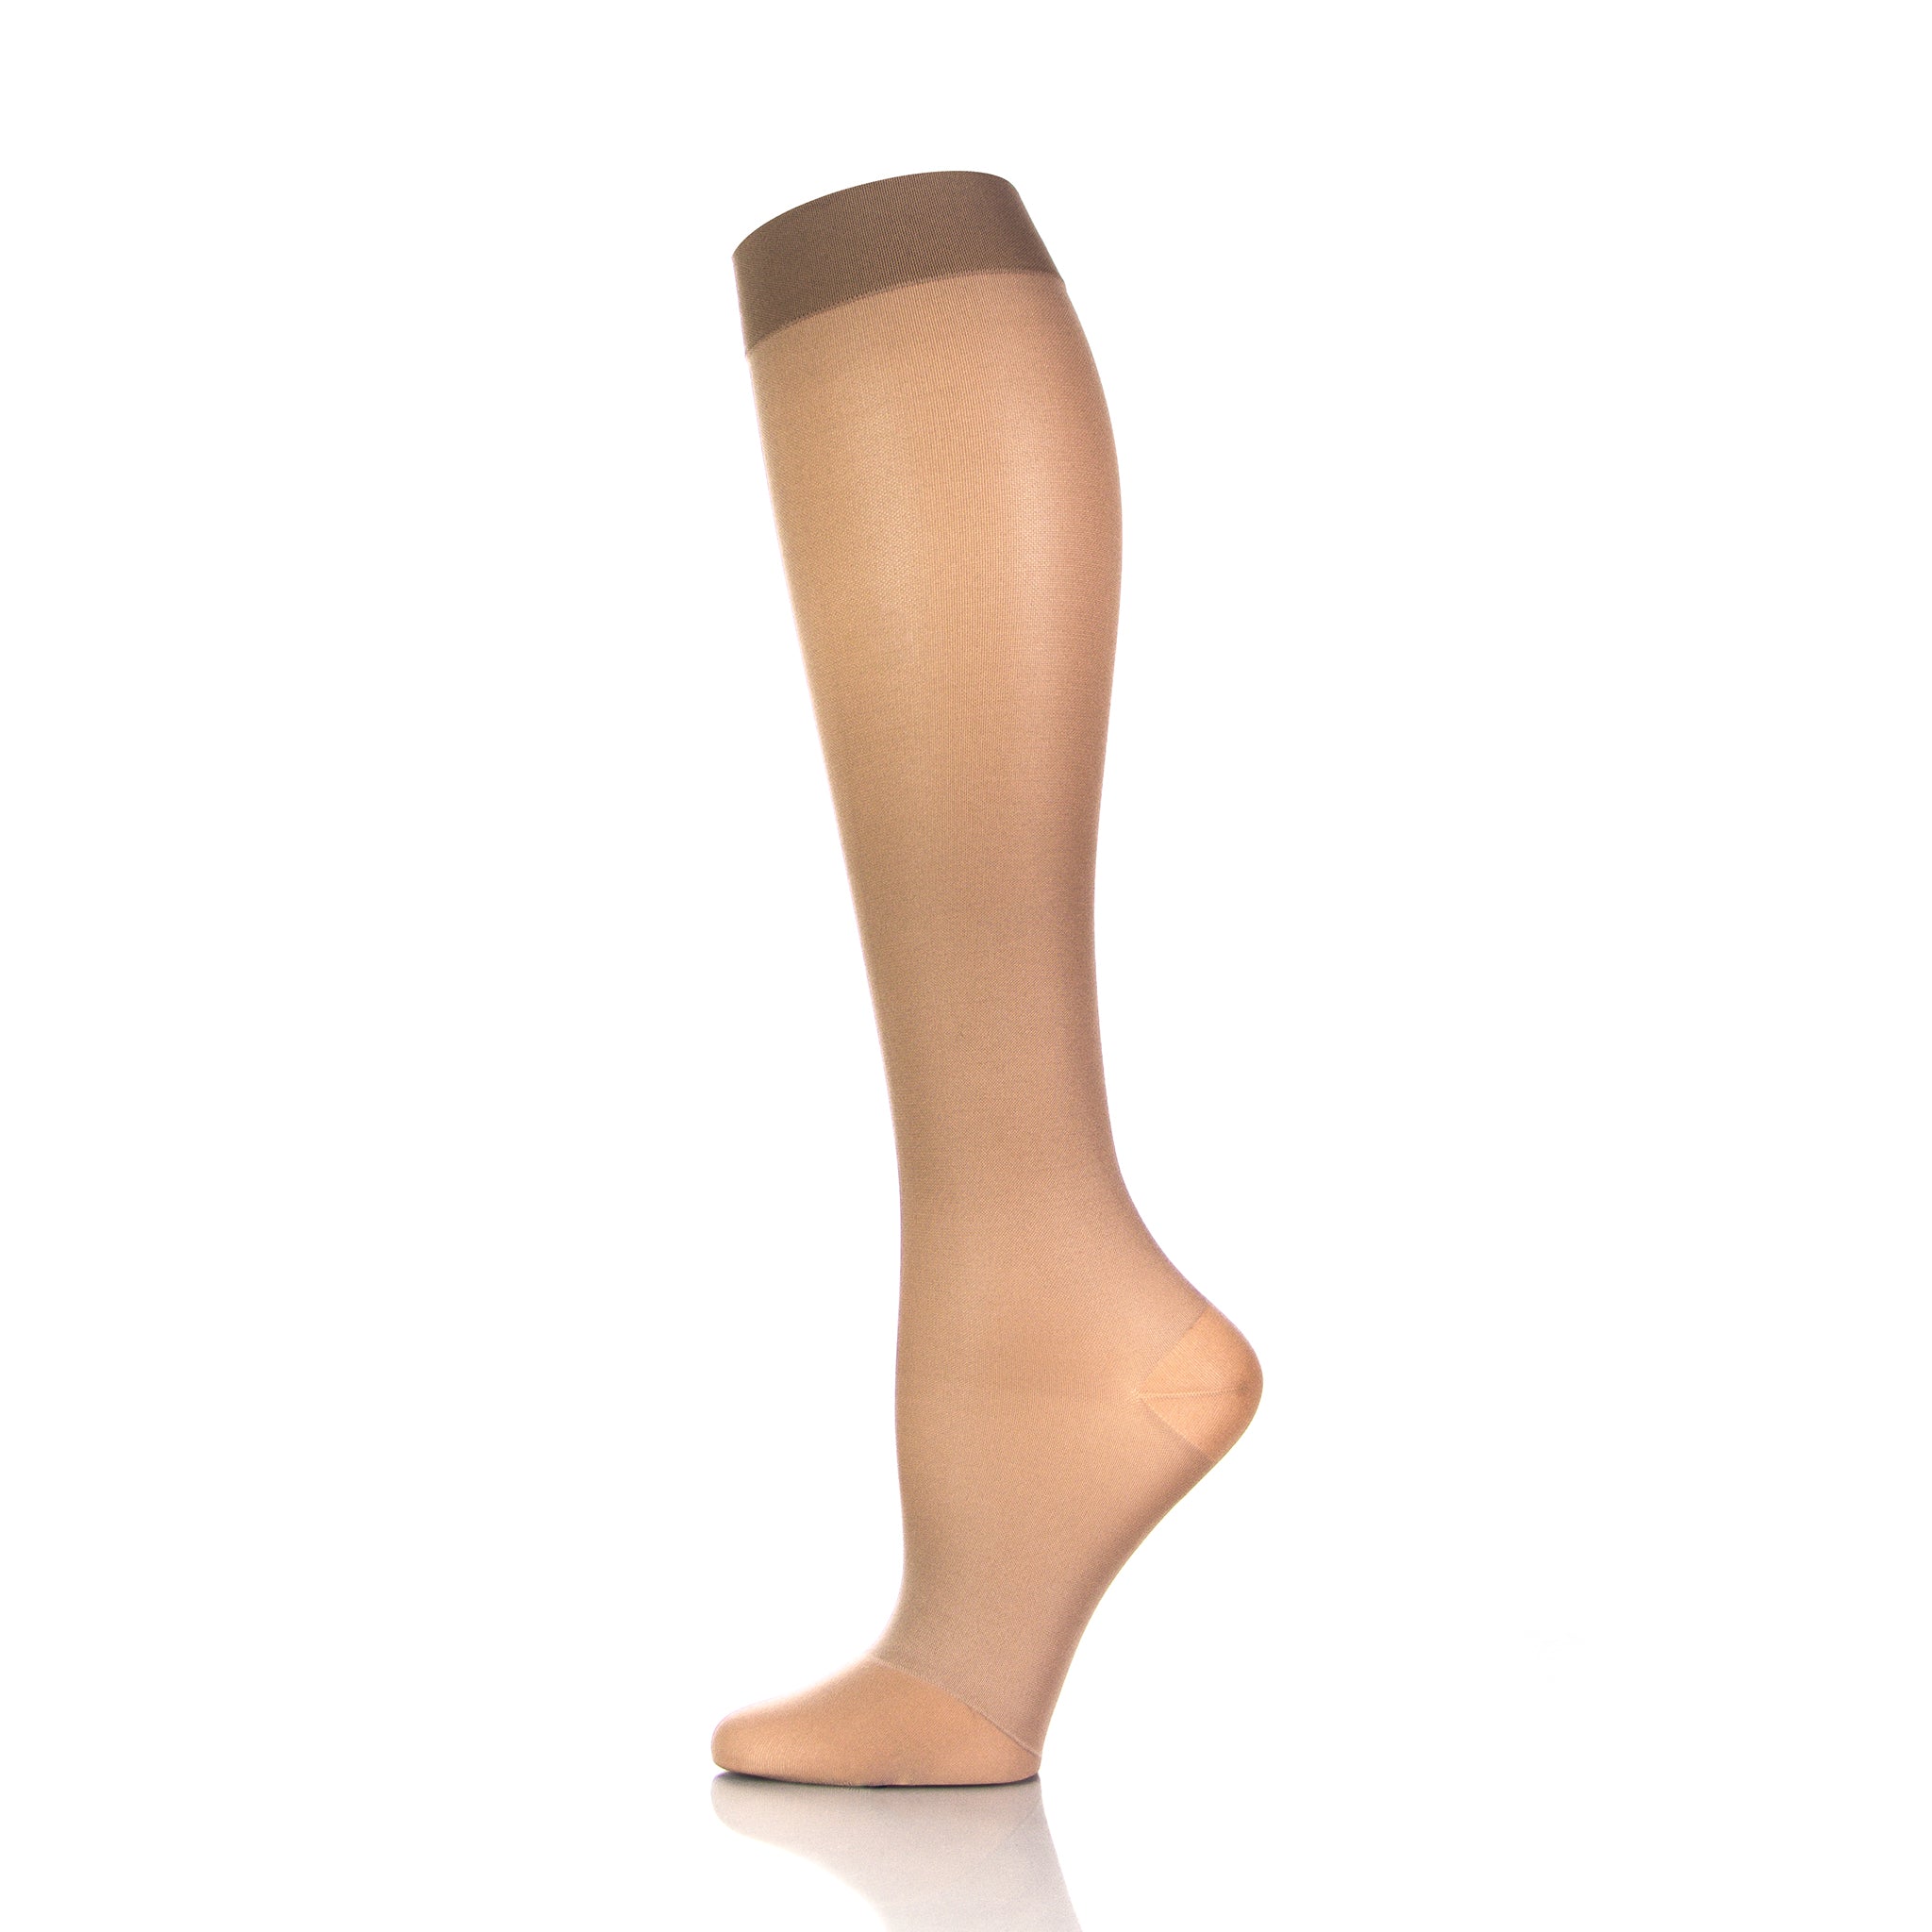 Circutrend Knee High Compression Socks For Women In 20 30 mmHg